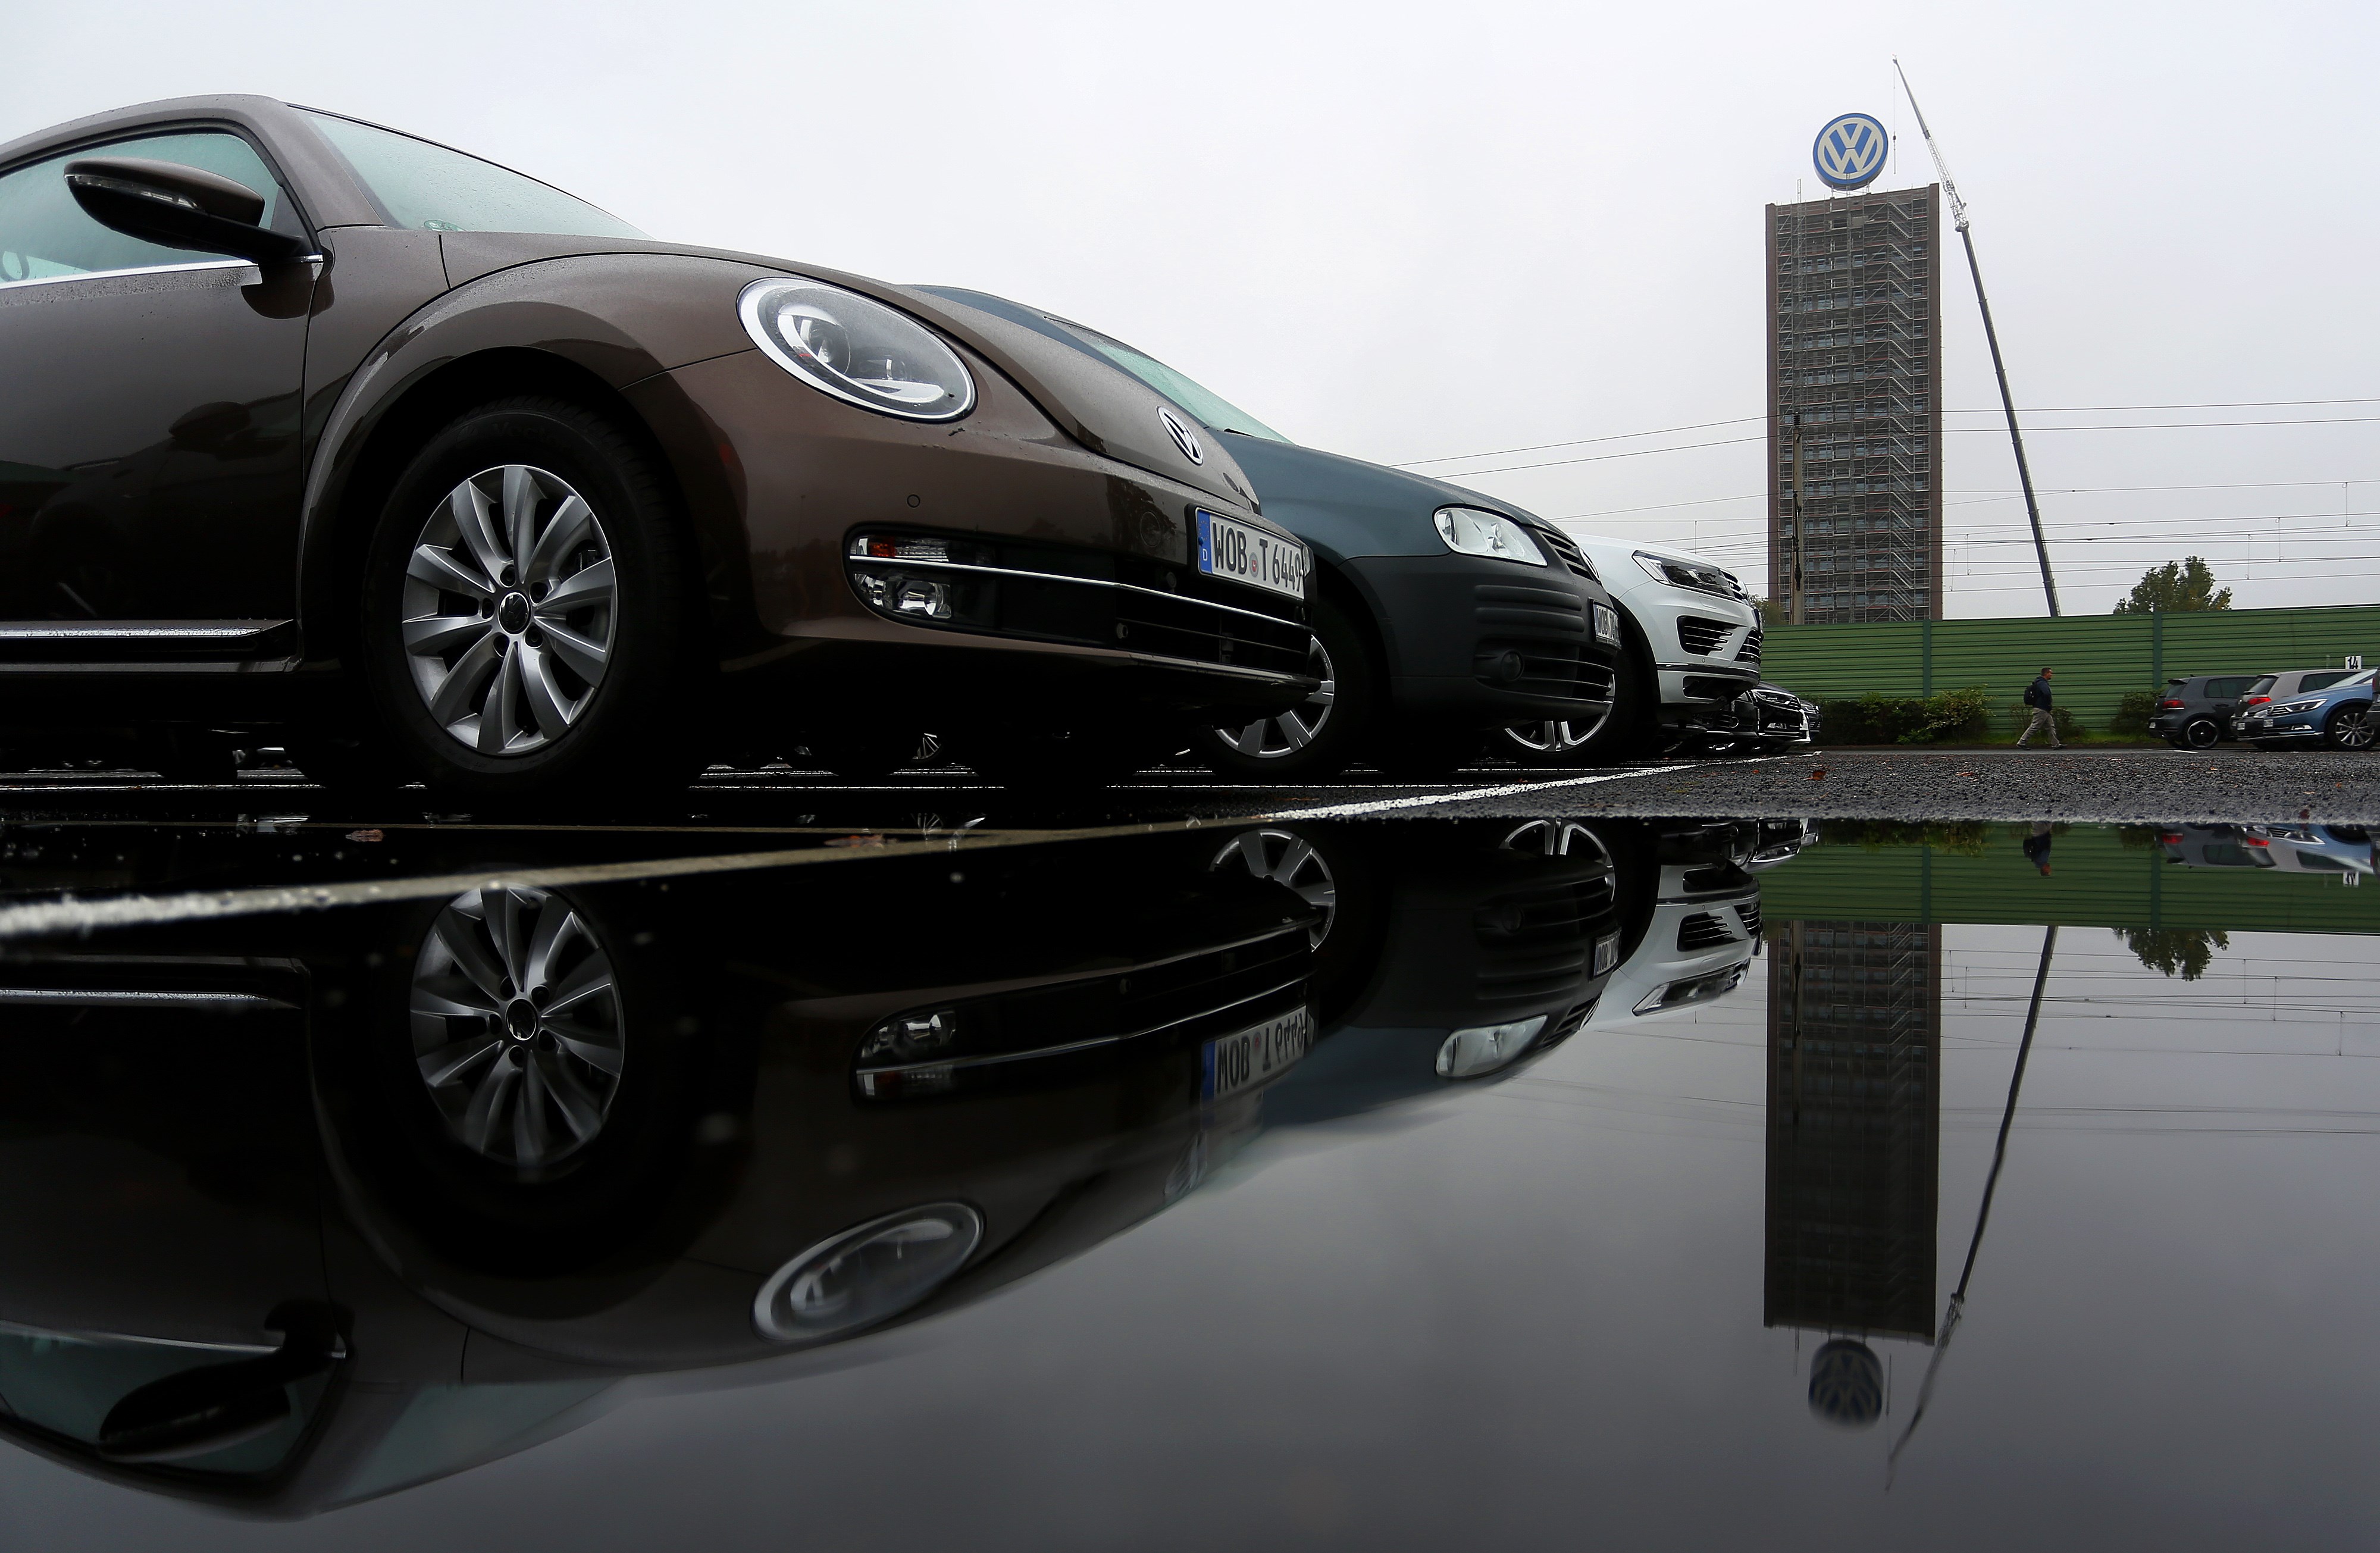 The logo of German carmaker Volkswagen and cars reflect on a rain puddle near the company's headquarters in Wolfsburg, central Germany, on Oct. 8, 2015 (Ronny Hartmann—AFP/Getty Images)